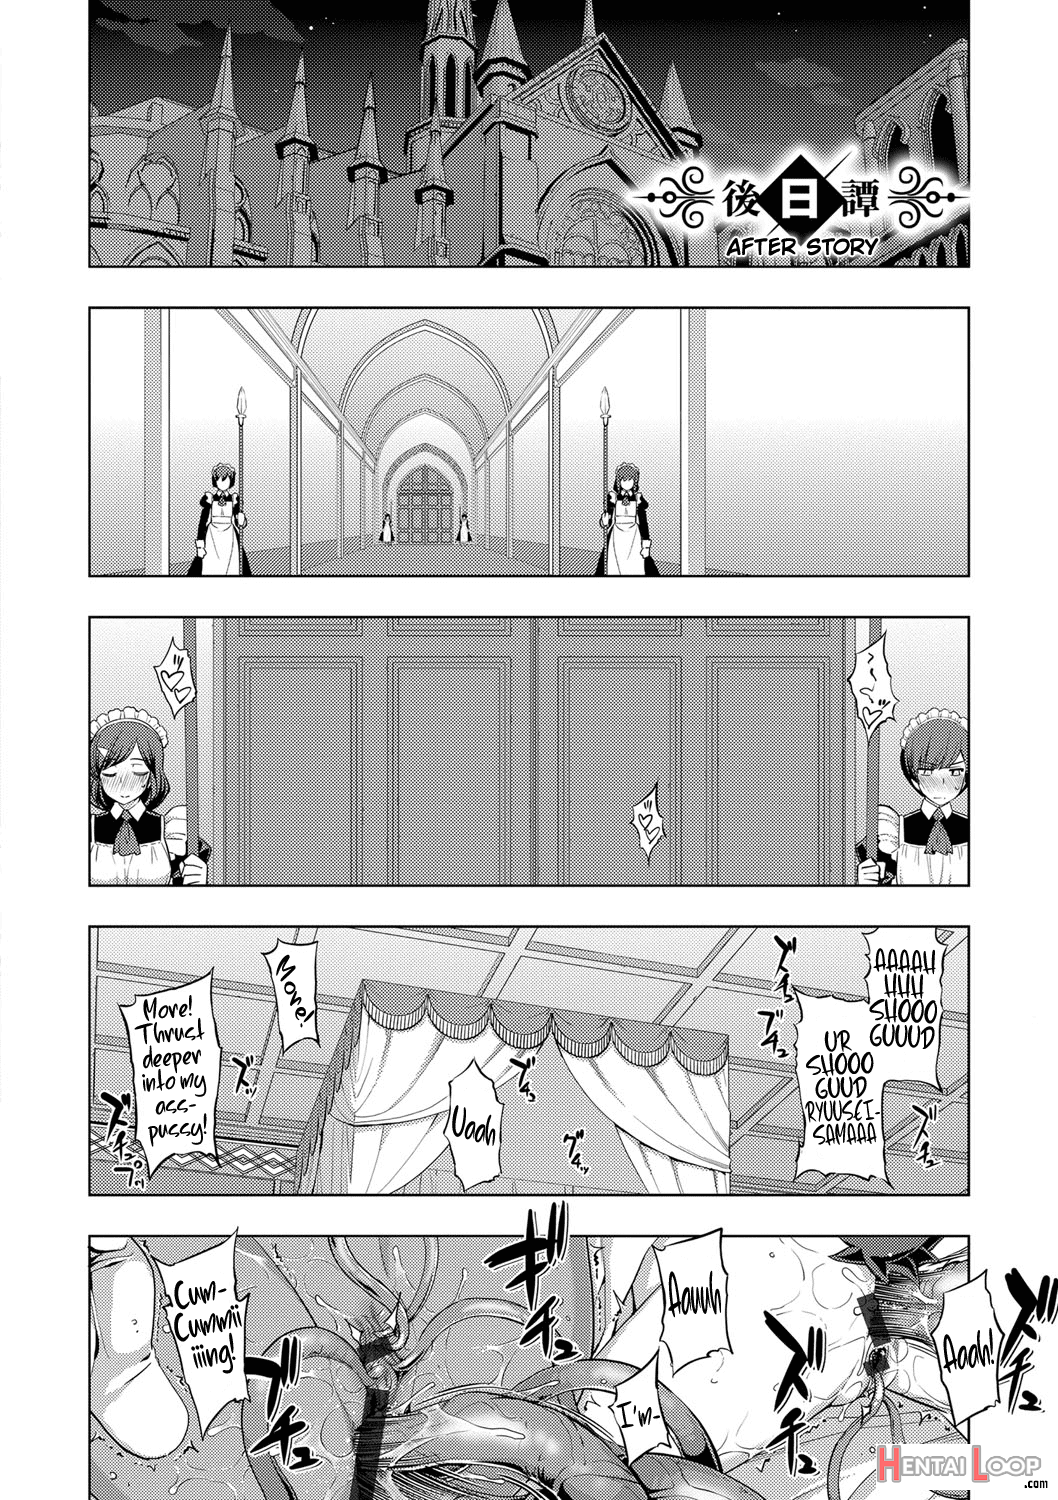 Maken No Kishi - Final Chapter + After Story page 58